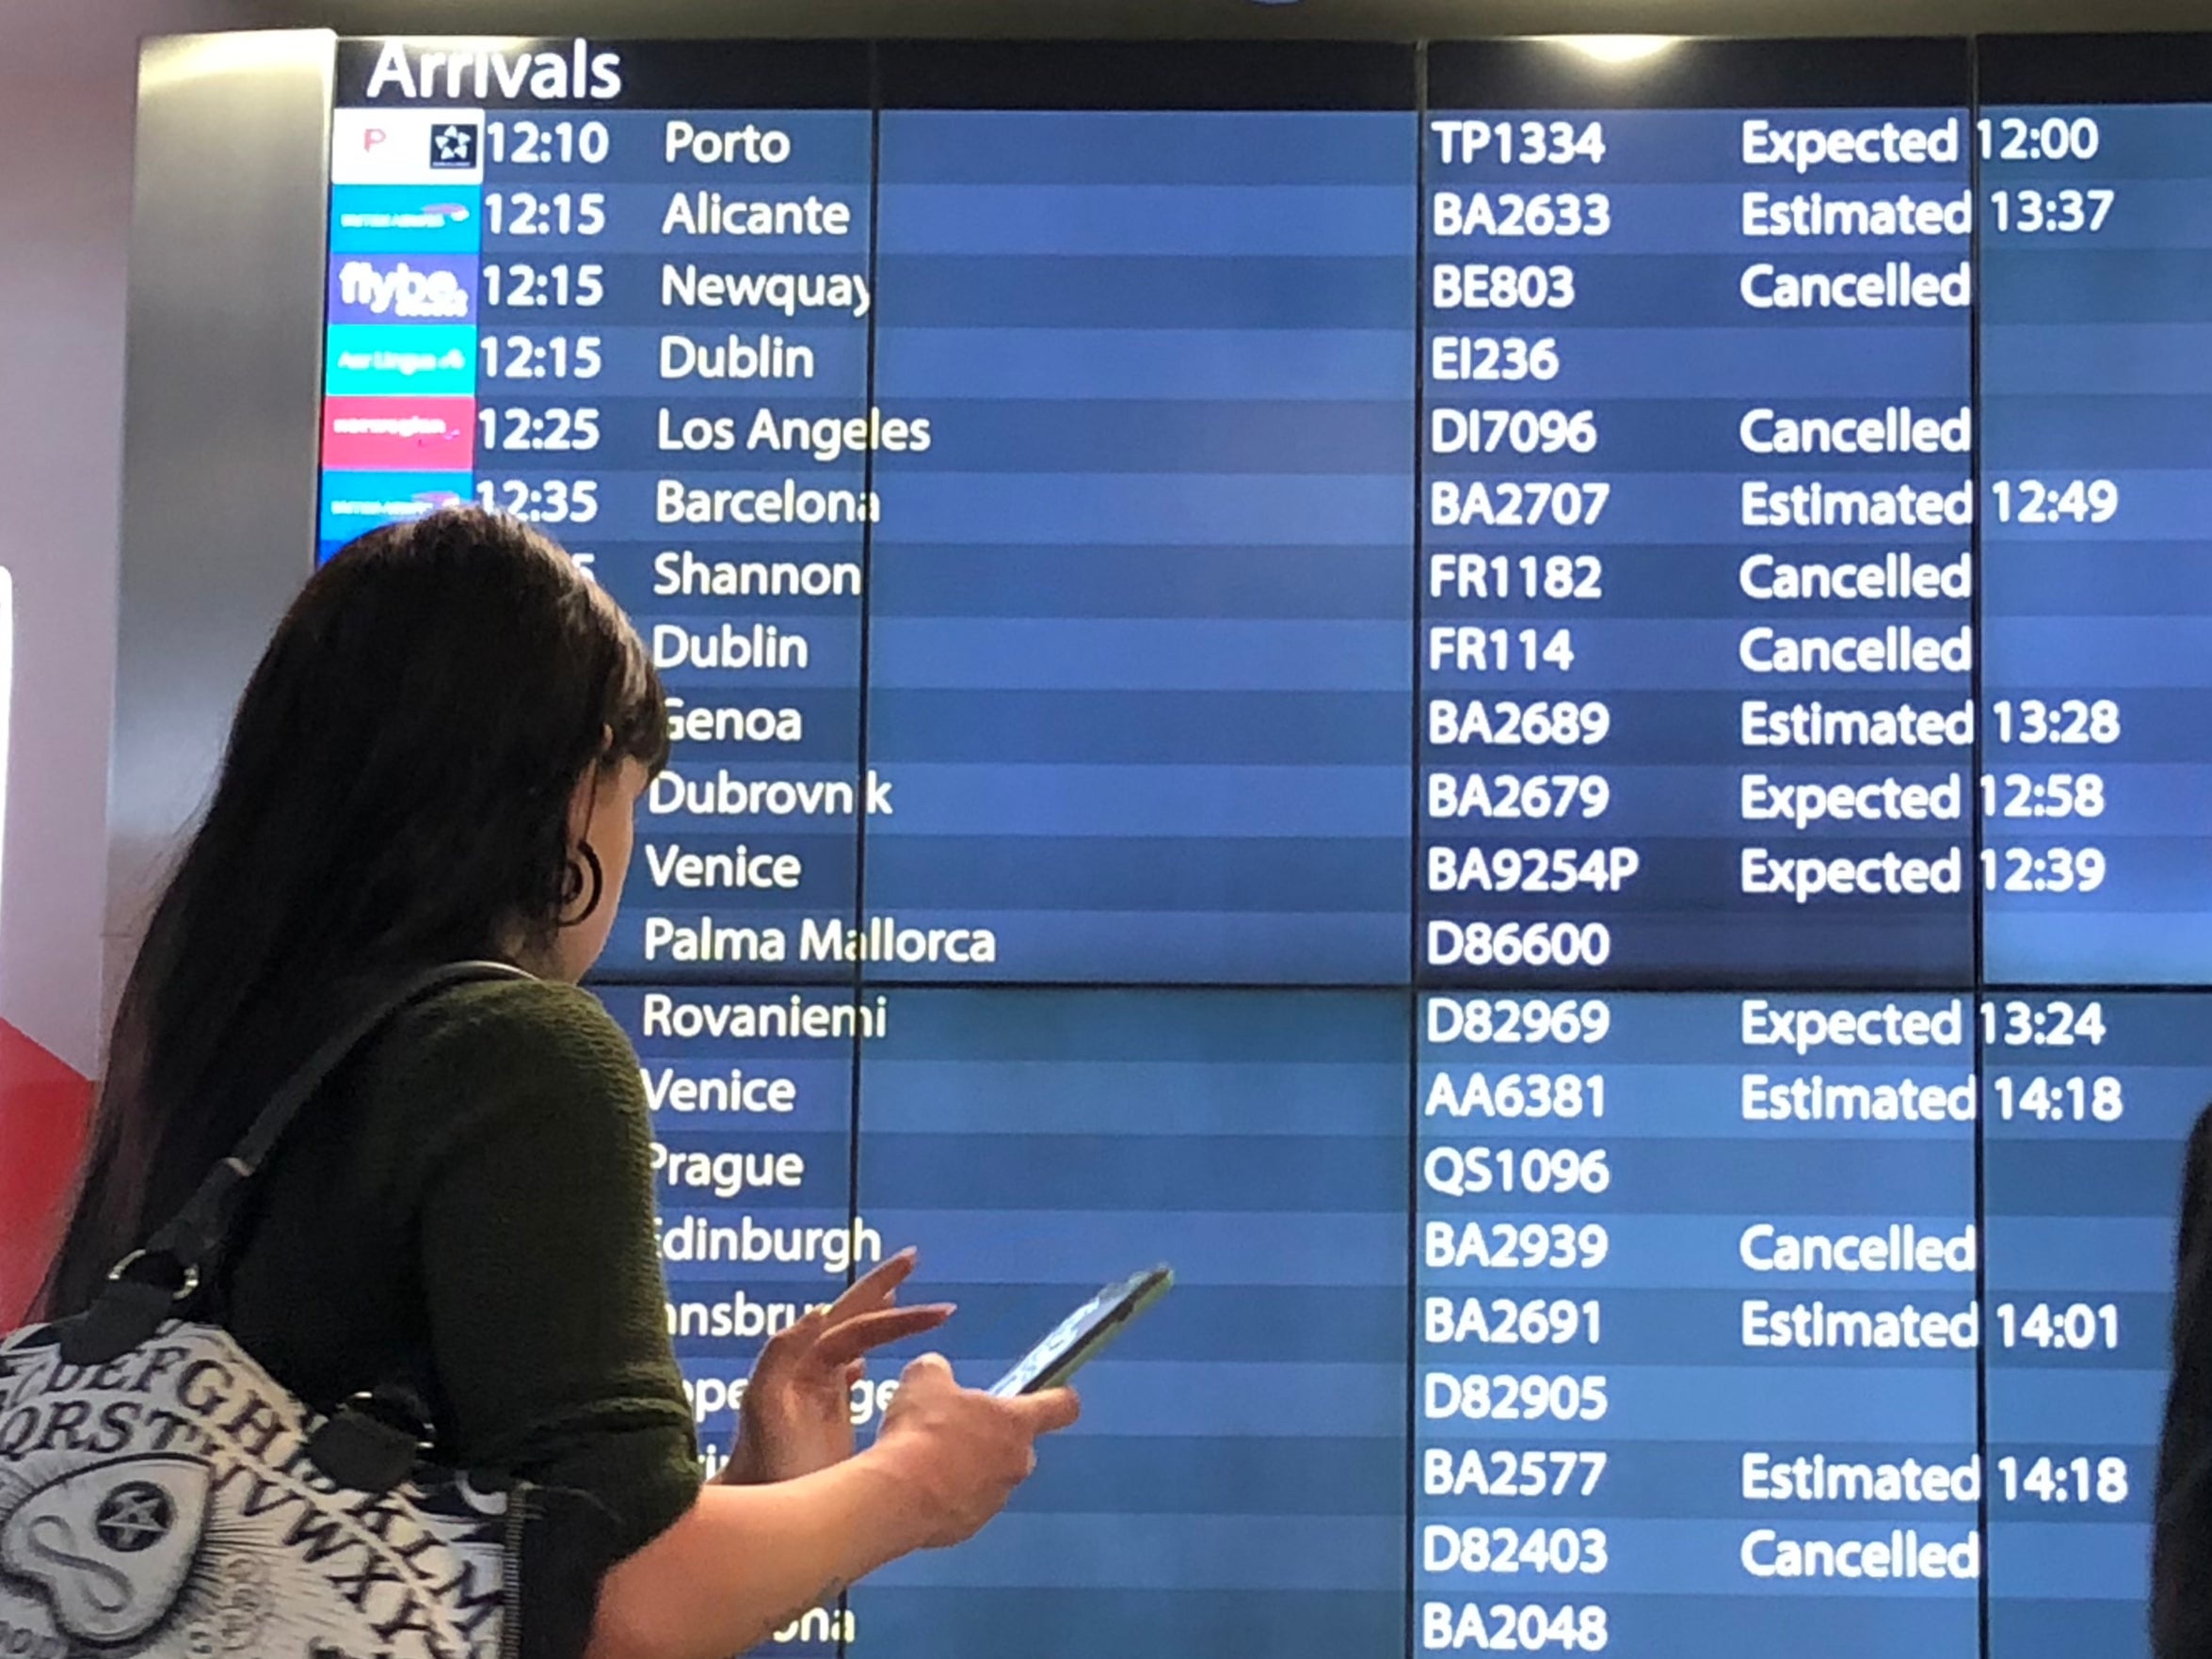 Ground control: Passengers whose flights are disrupted have extensive rights